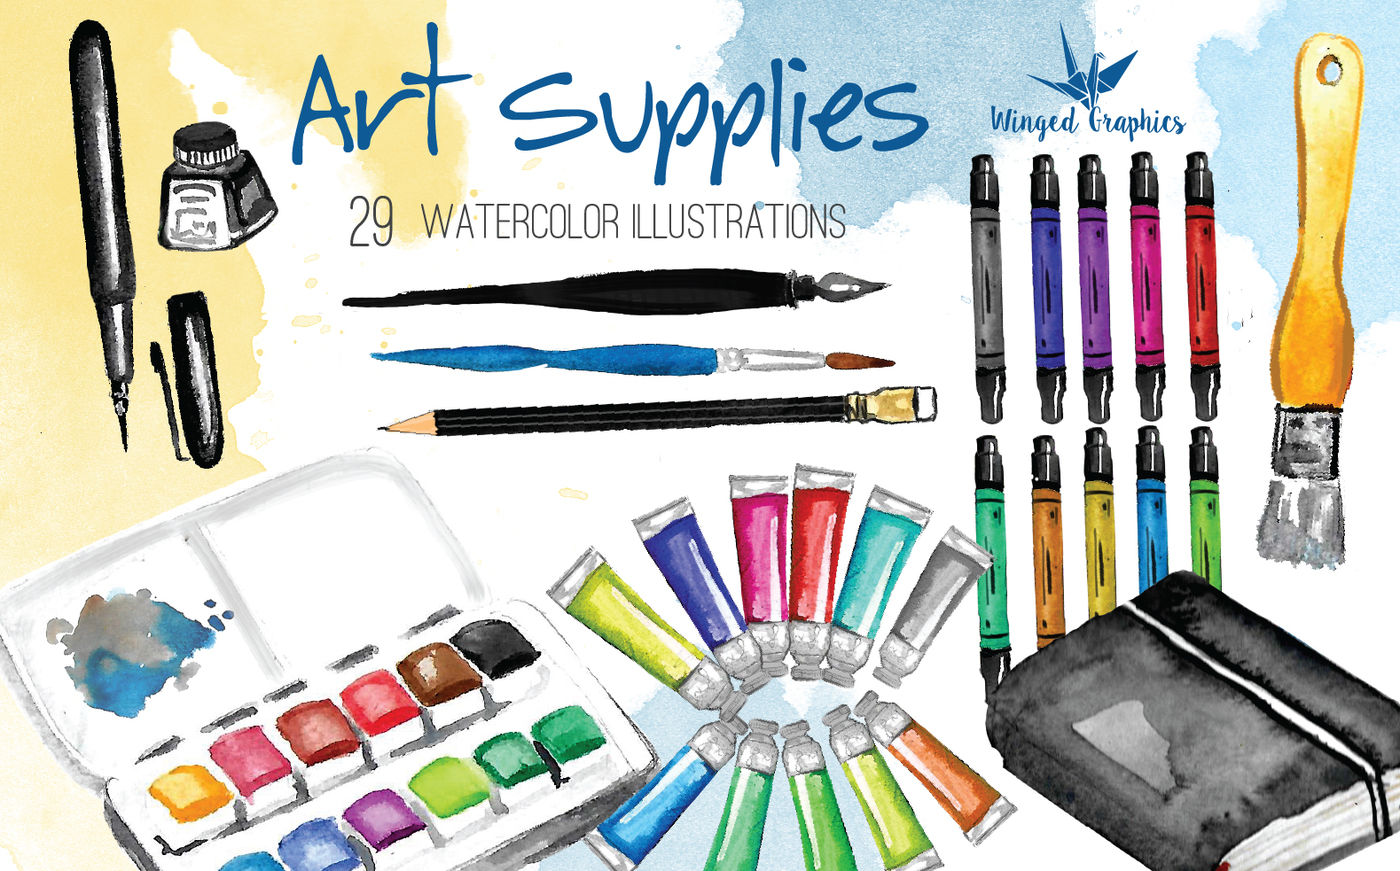 Art supplies: watercolor illustration By Winged Graphics